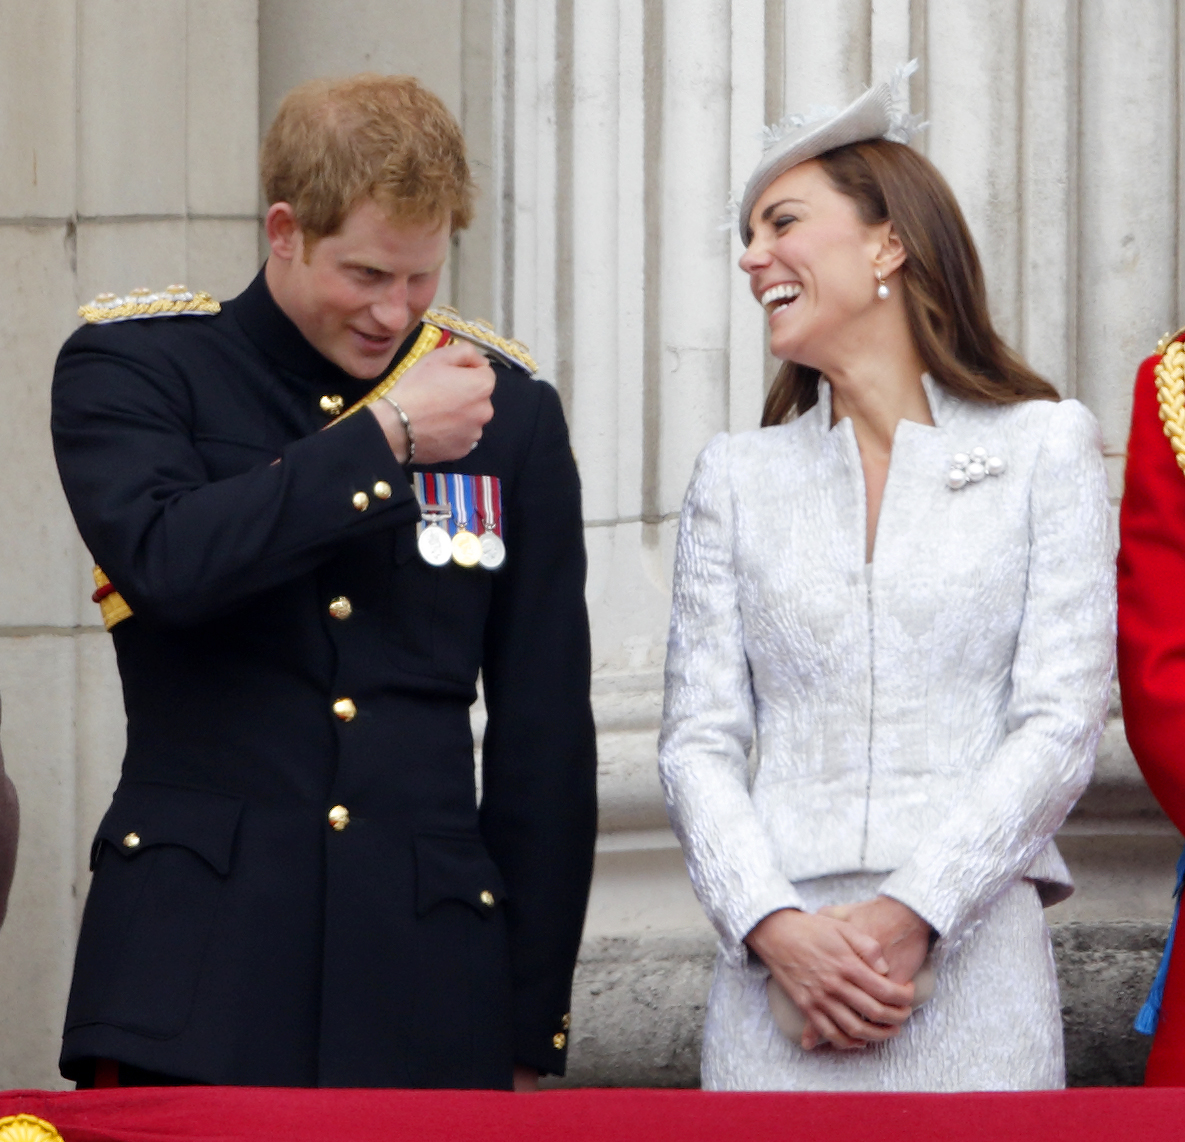 Prince Harry and Catherine, Duchess of Cambridge watch the fly-past from the balcony of Buckingham Palace during Trooping the Colour, Queen Elizabeth II's Birthday Parade on June 14, 2014 in London.